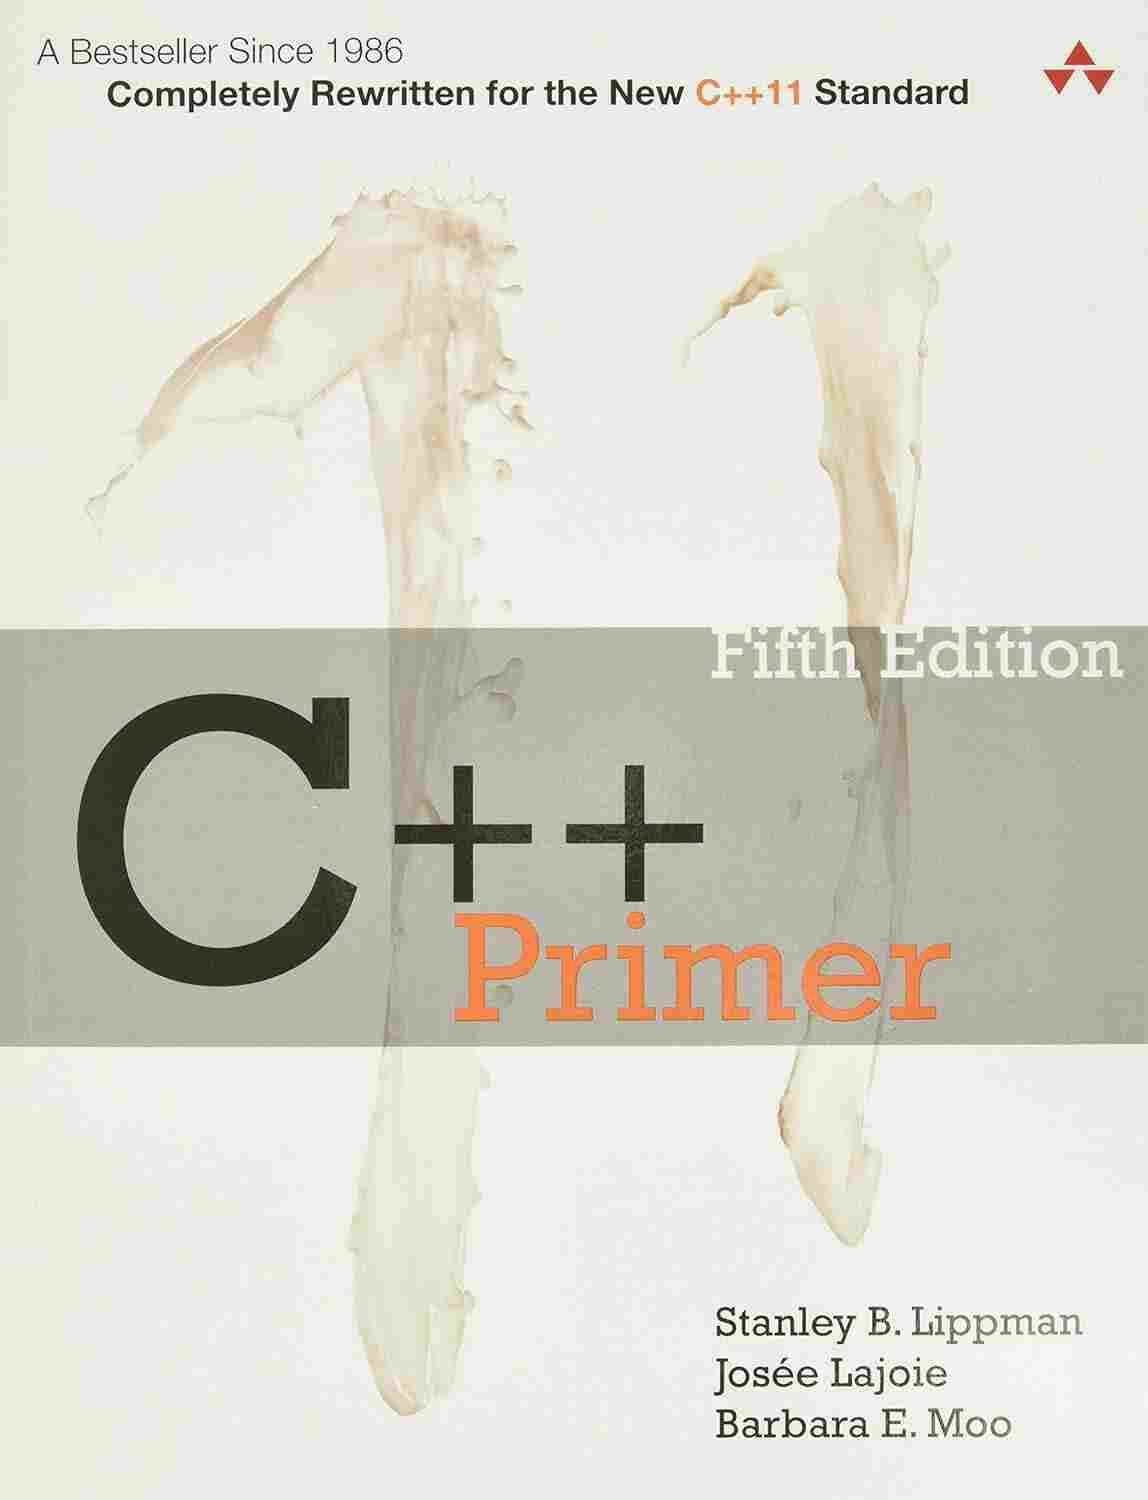 #2 C++ Primer- best book to learn c++